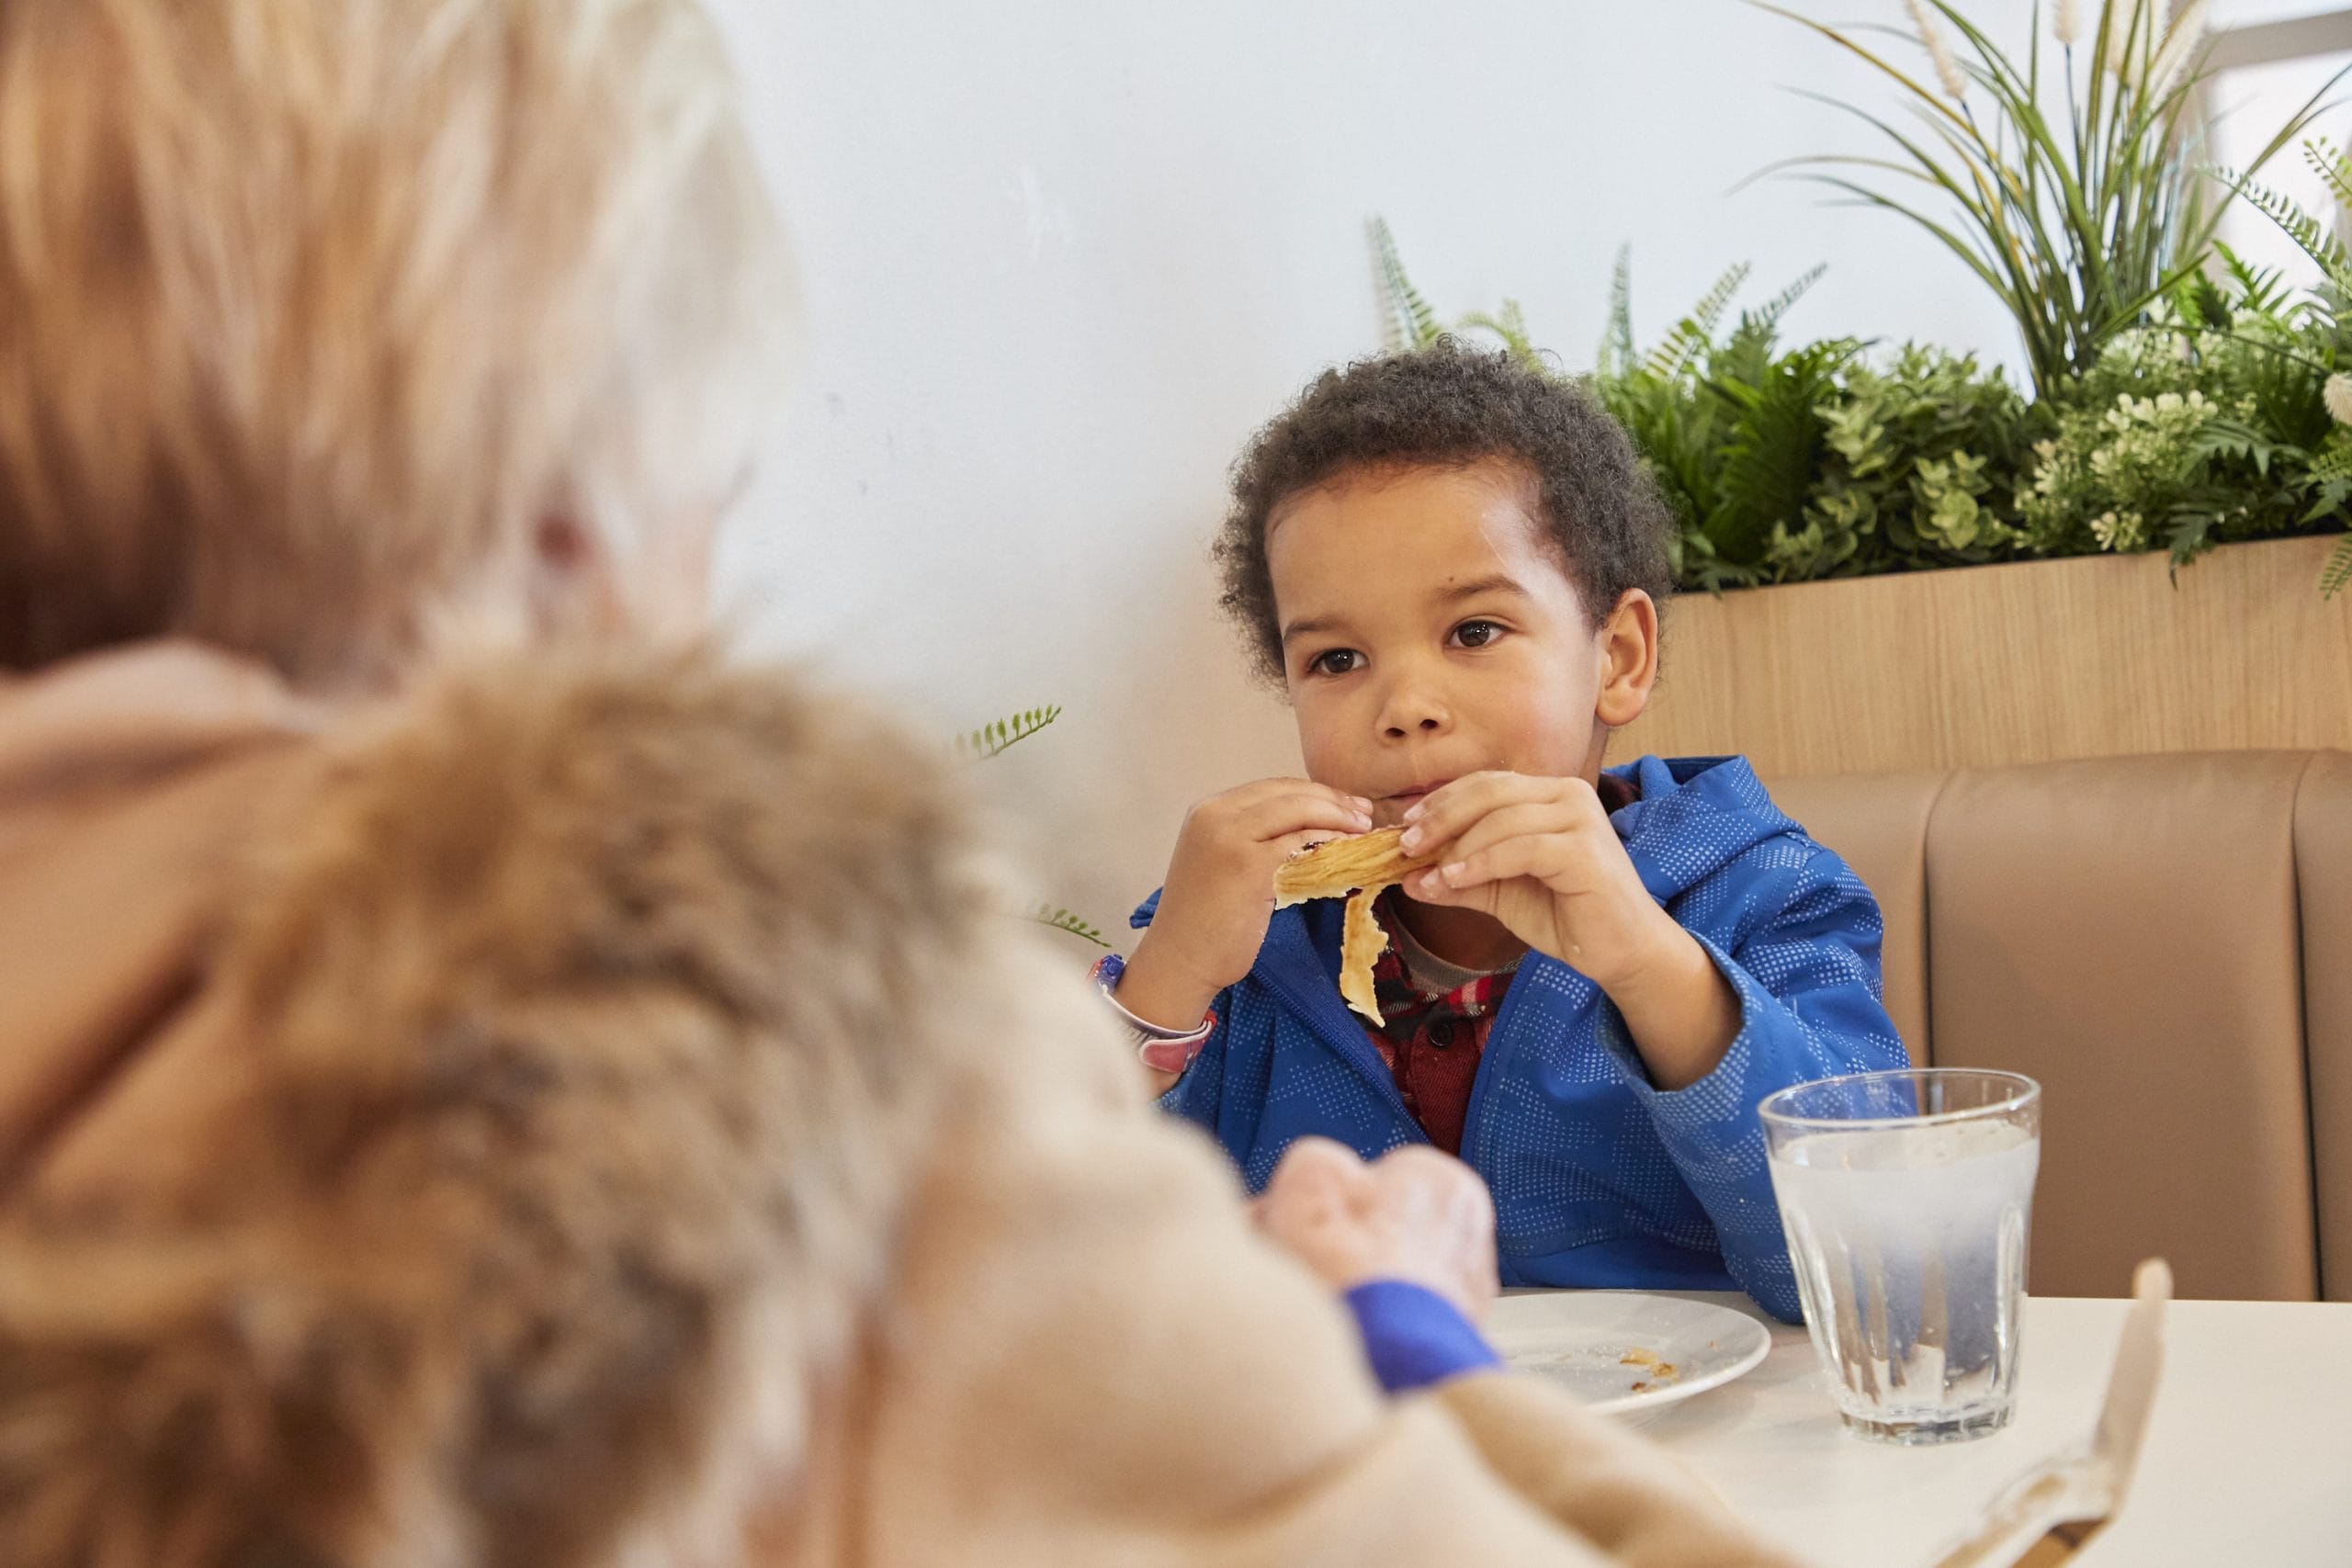 A little boy, in a blue jumper enjoys his snack at a café table.